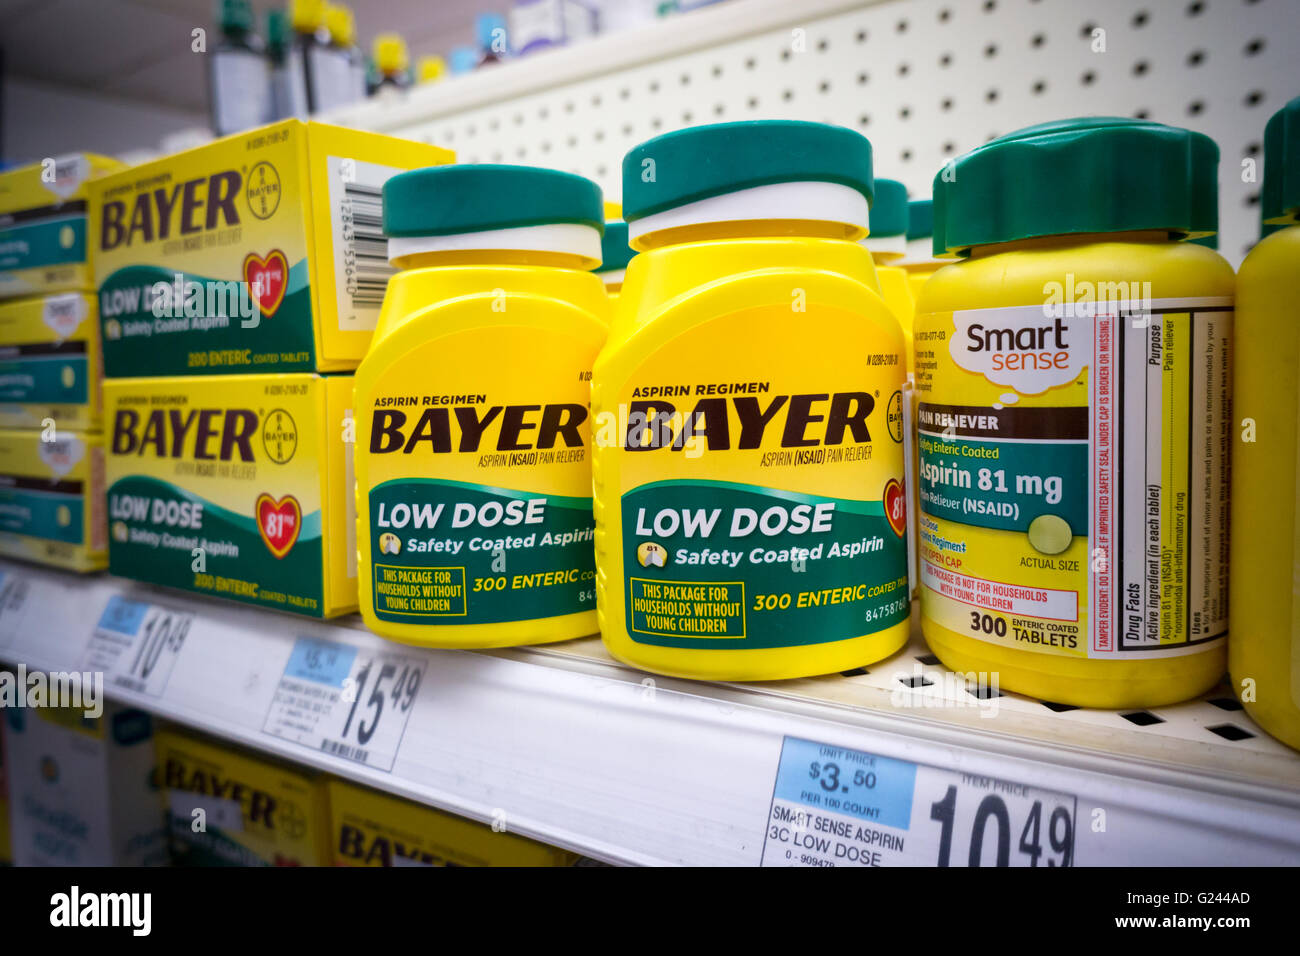 Containers of Bayer aspirin on a drugstore shelf in New York on Monday, May 23, 2016. Bayer AG, the German pharmaceutical and chemical company, has made an offer to buy the Monsanto Co. for $62 billion. The combined companies would be the largest agrochemical business in the world.  (© Richard B. Levine) Stock Photo